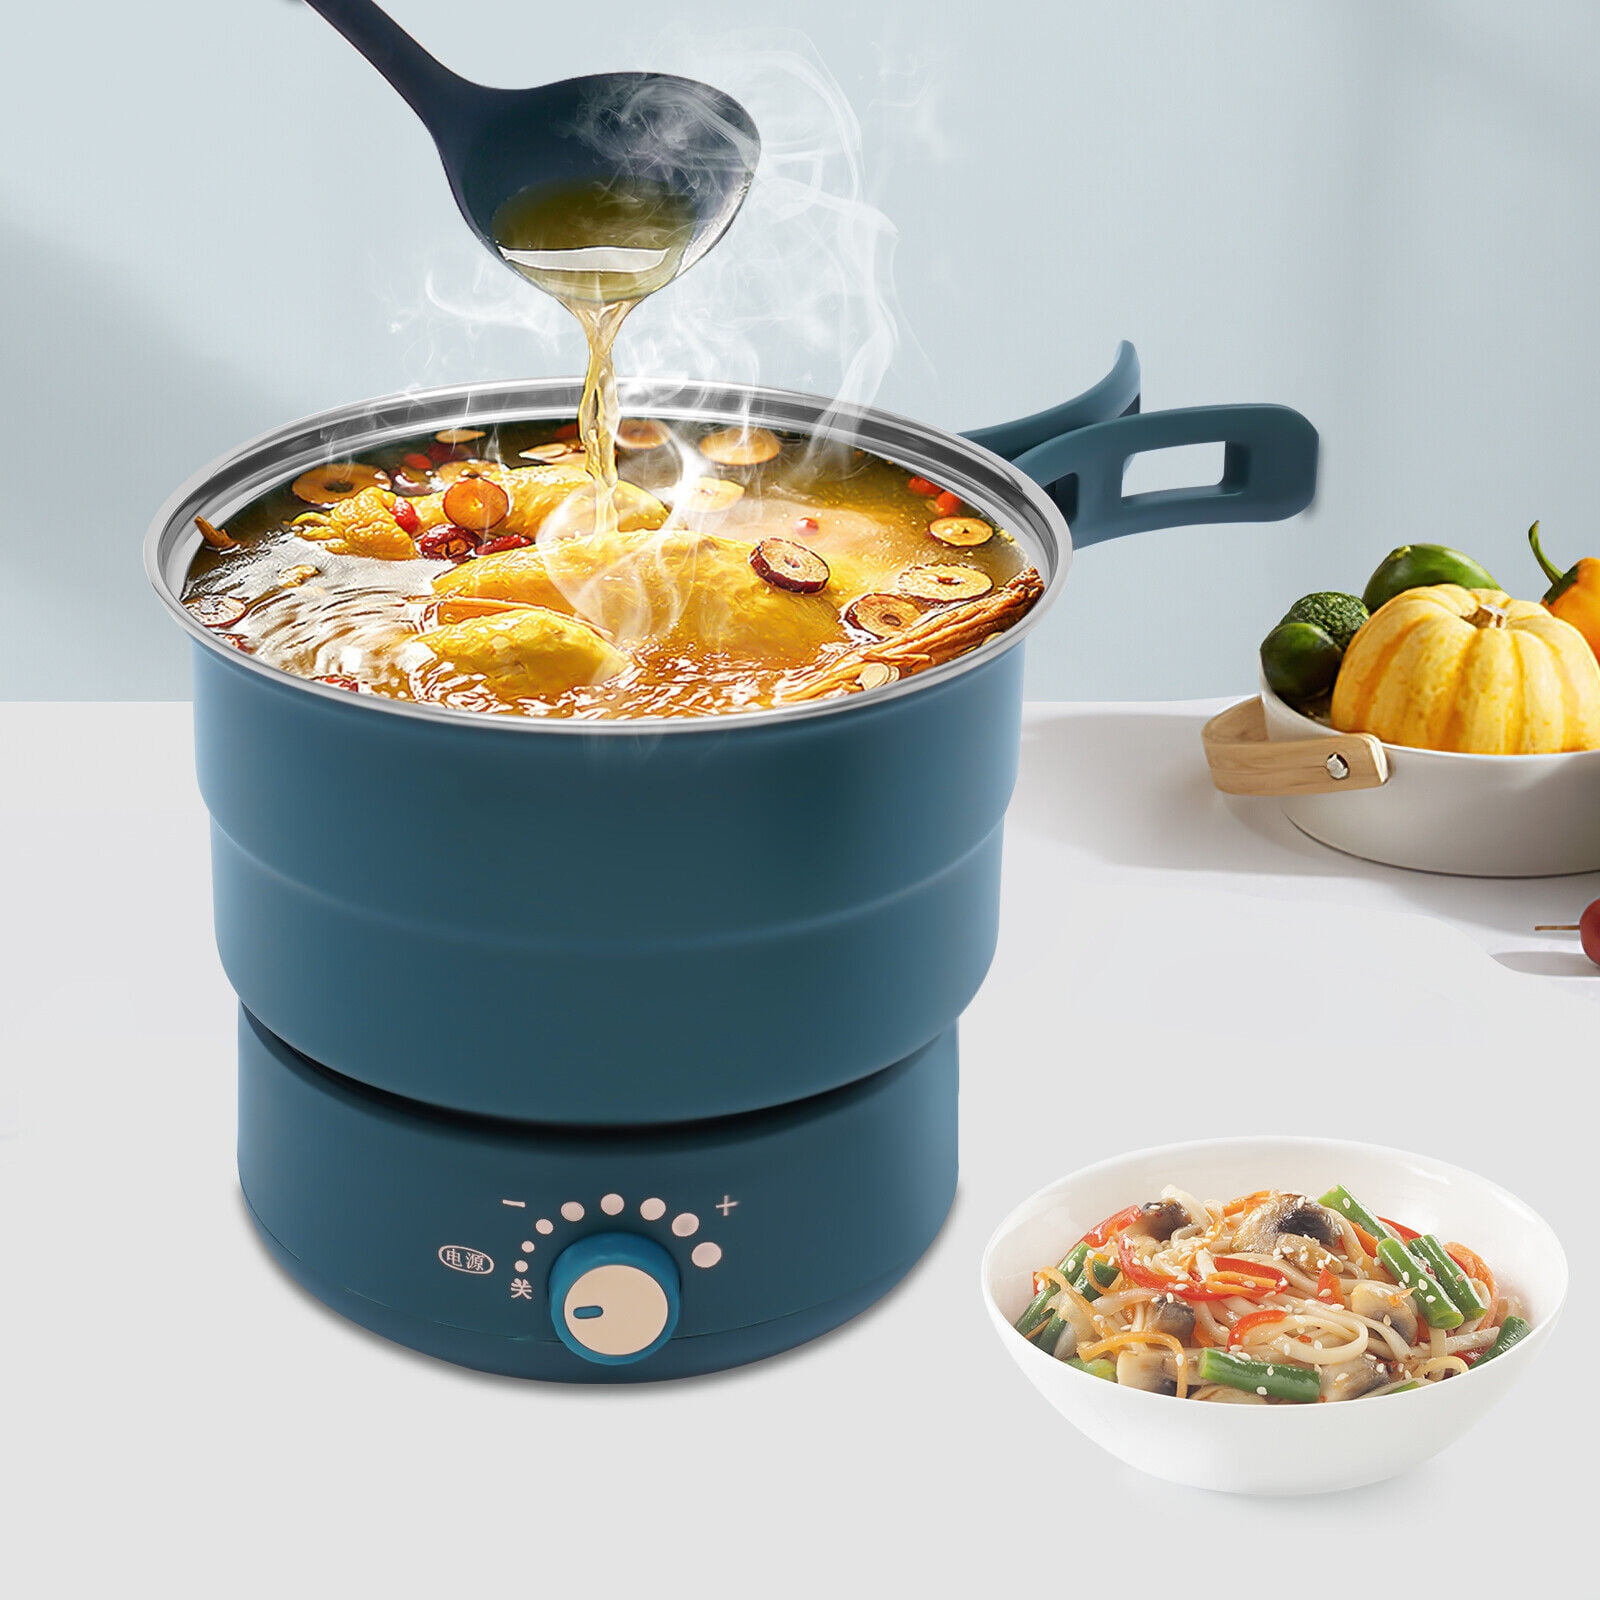 OUSIKA 1.8 L Electric Hot Pot, Rapid Noodles Cooker, Stainless Steel Mini  Pot for Boiling Water, Eggs, Cooking, Noodles, Multifunctional Rice Cooker